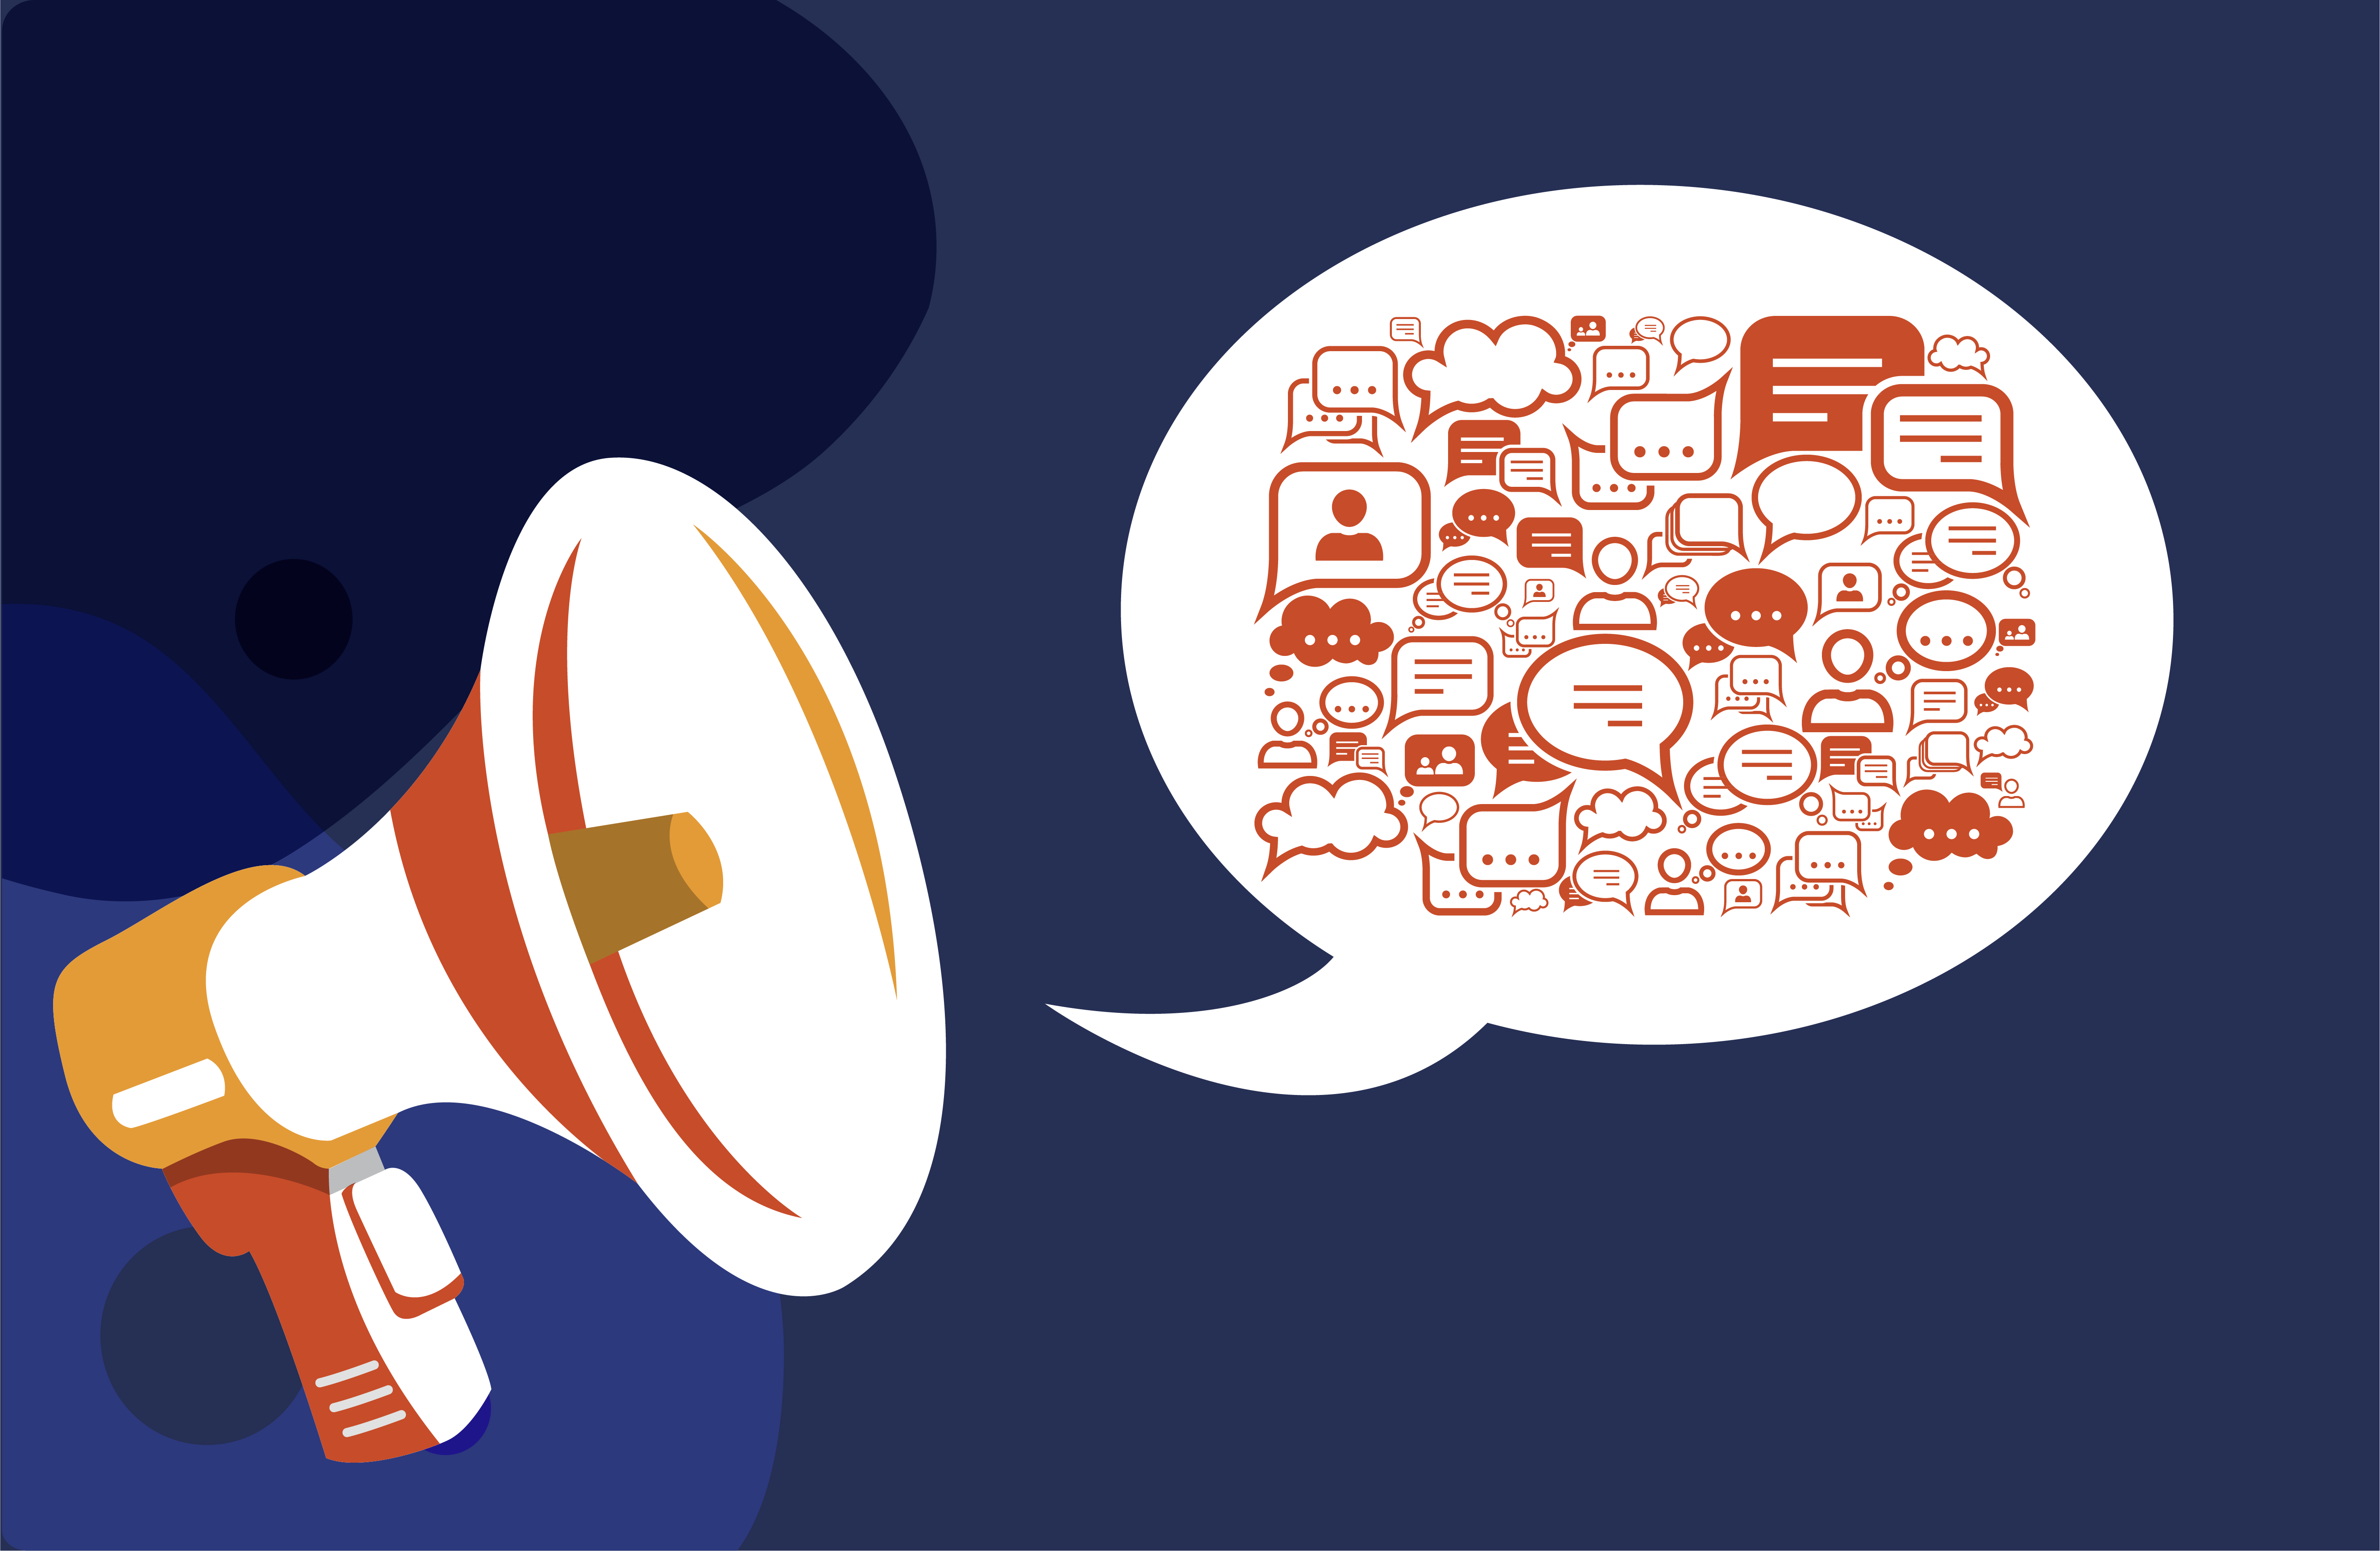 Illustration of a megaphone with a speech bubble full of chat icons